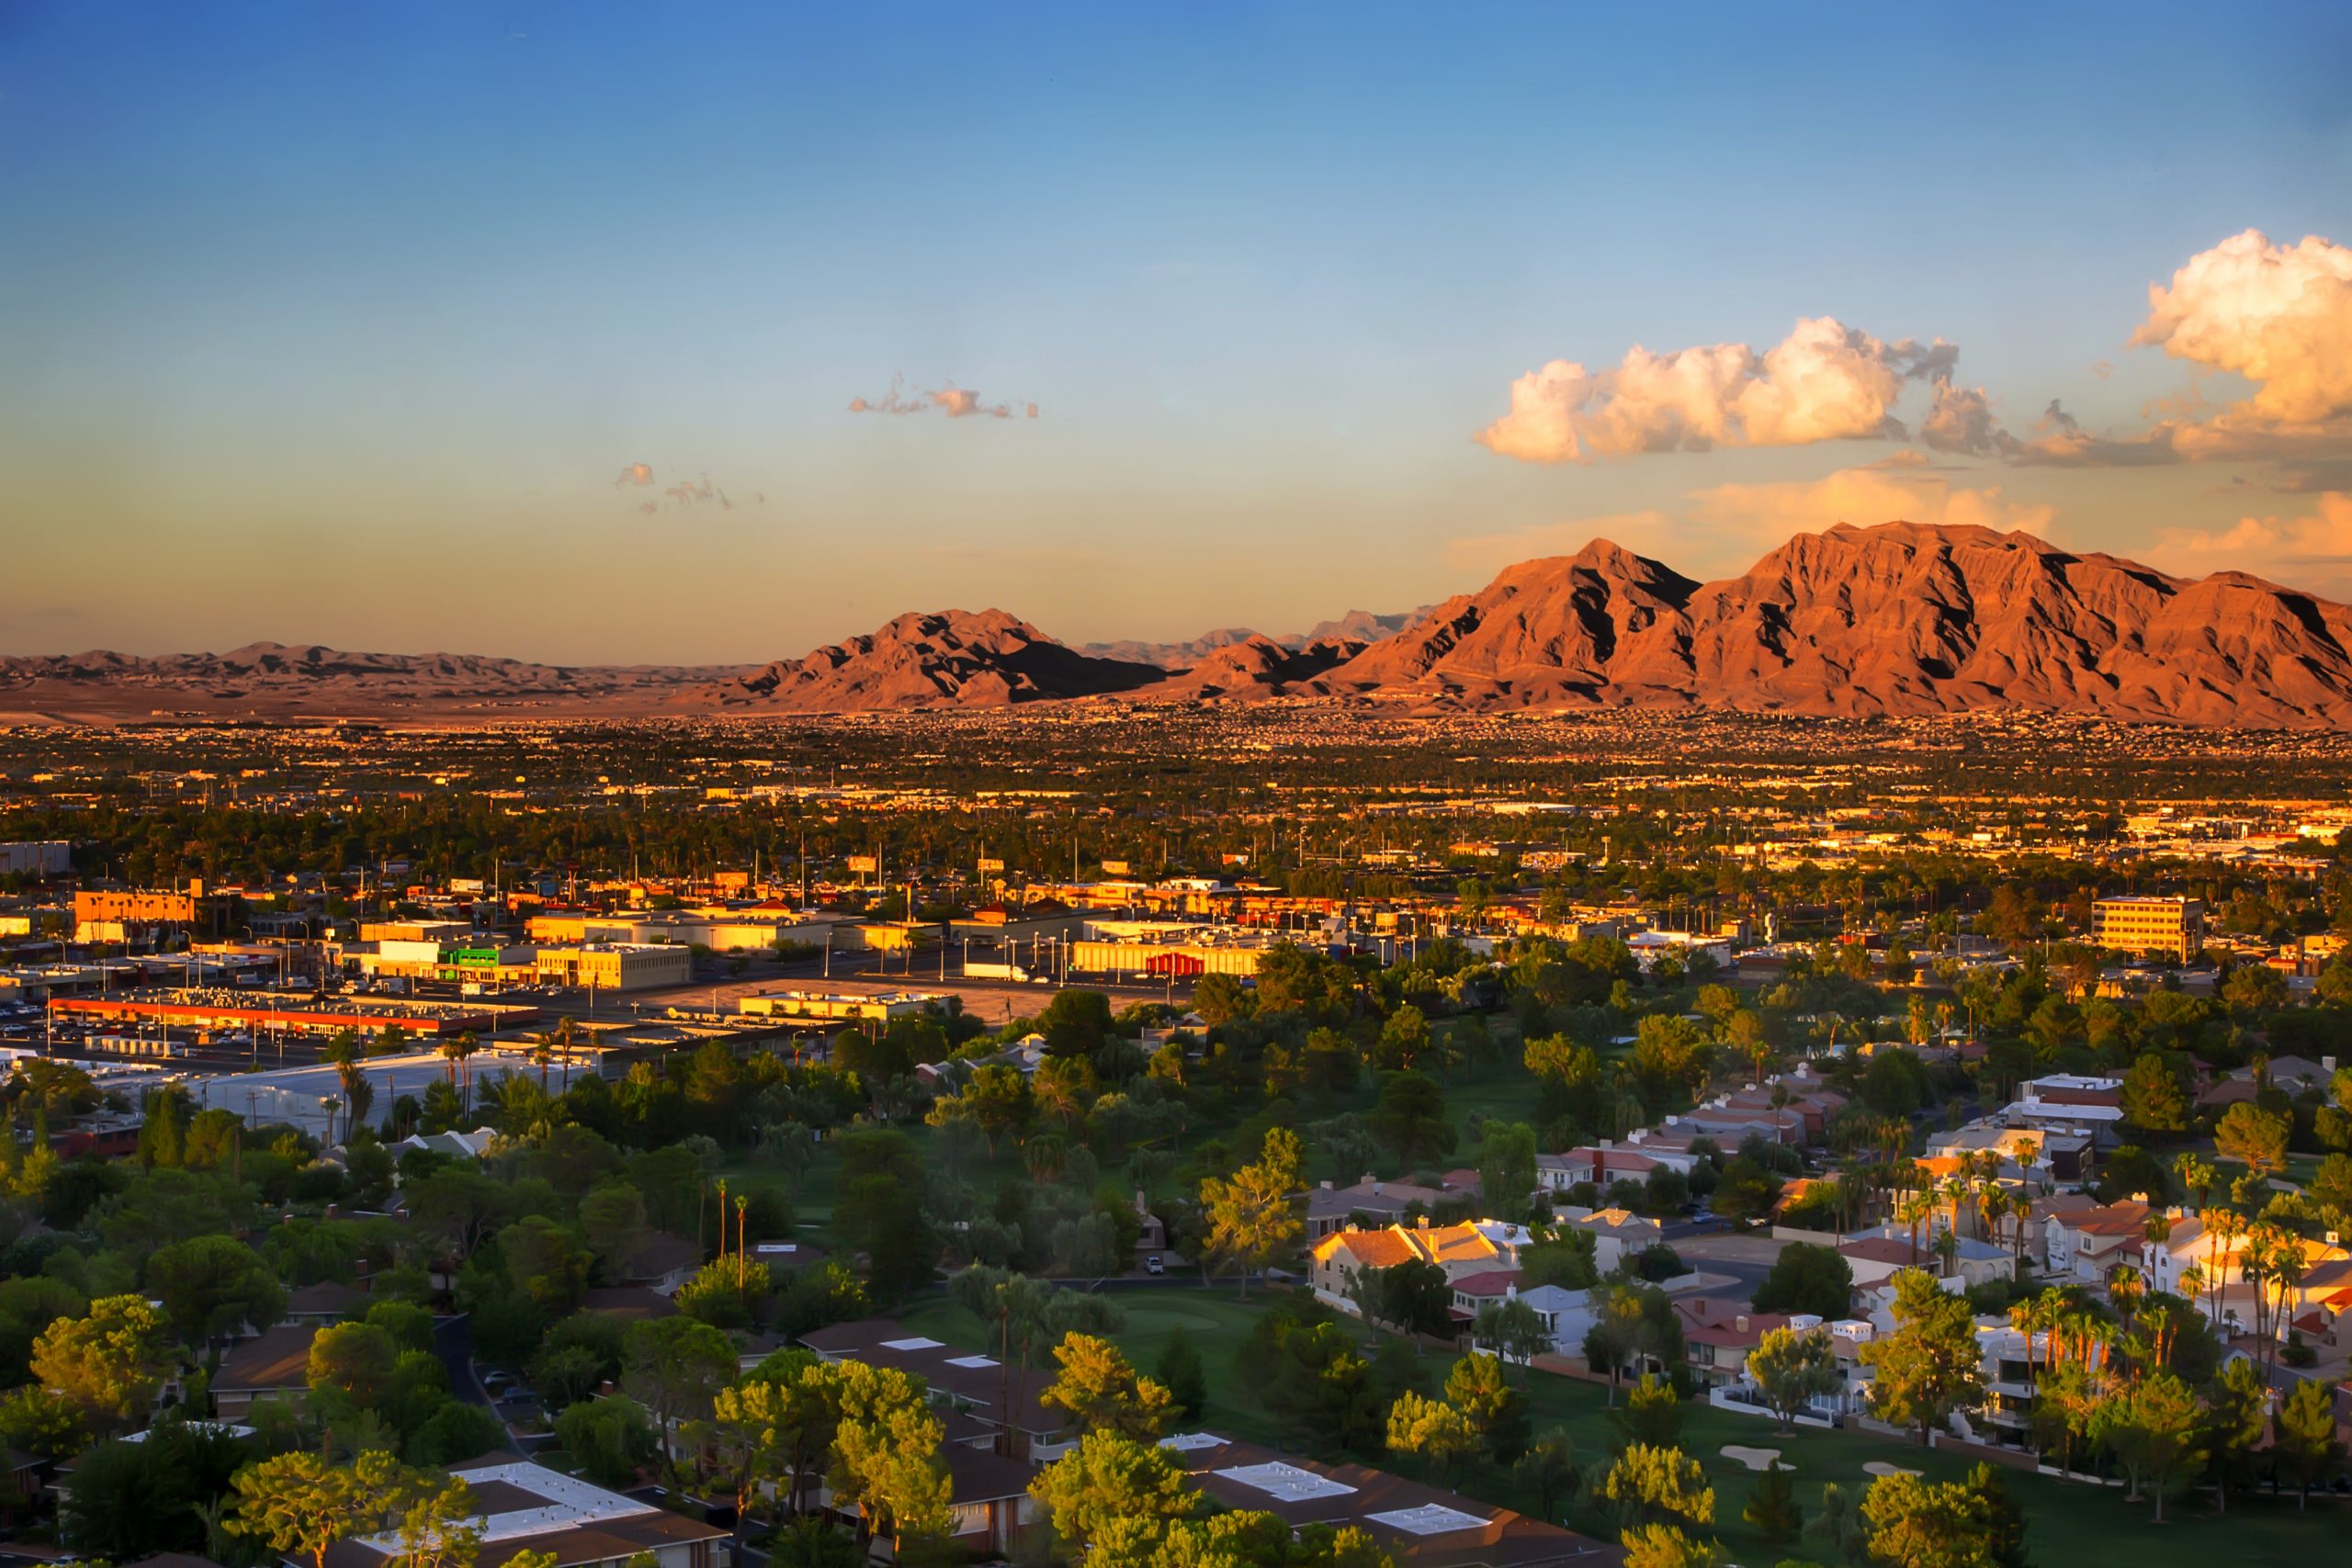 Aerial photo of single family neighborhood in Las Vegas with mountains in the background